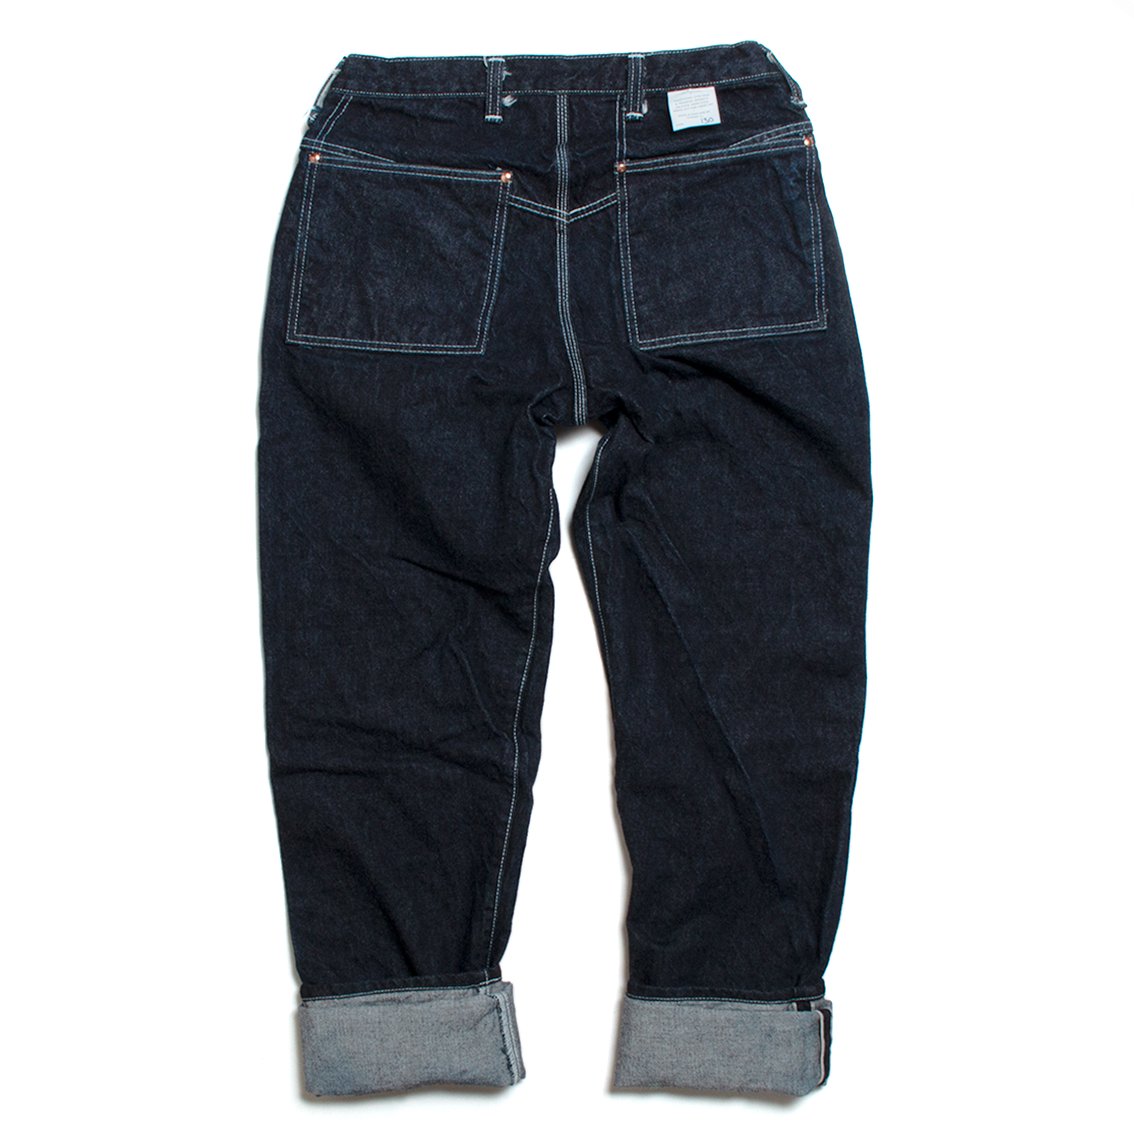 TENDER Co. 130 RINCE TAPERED JEANS